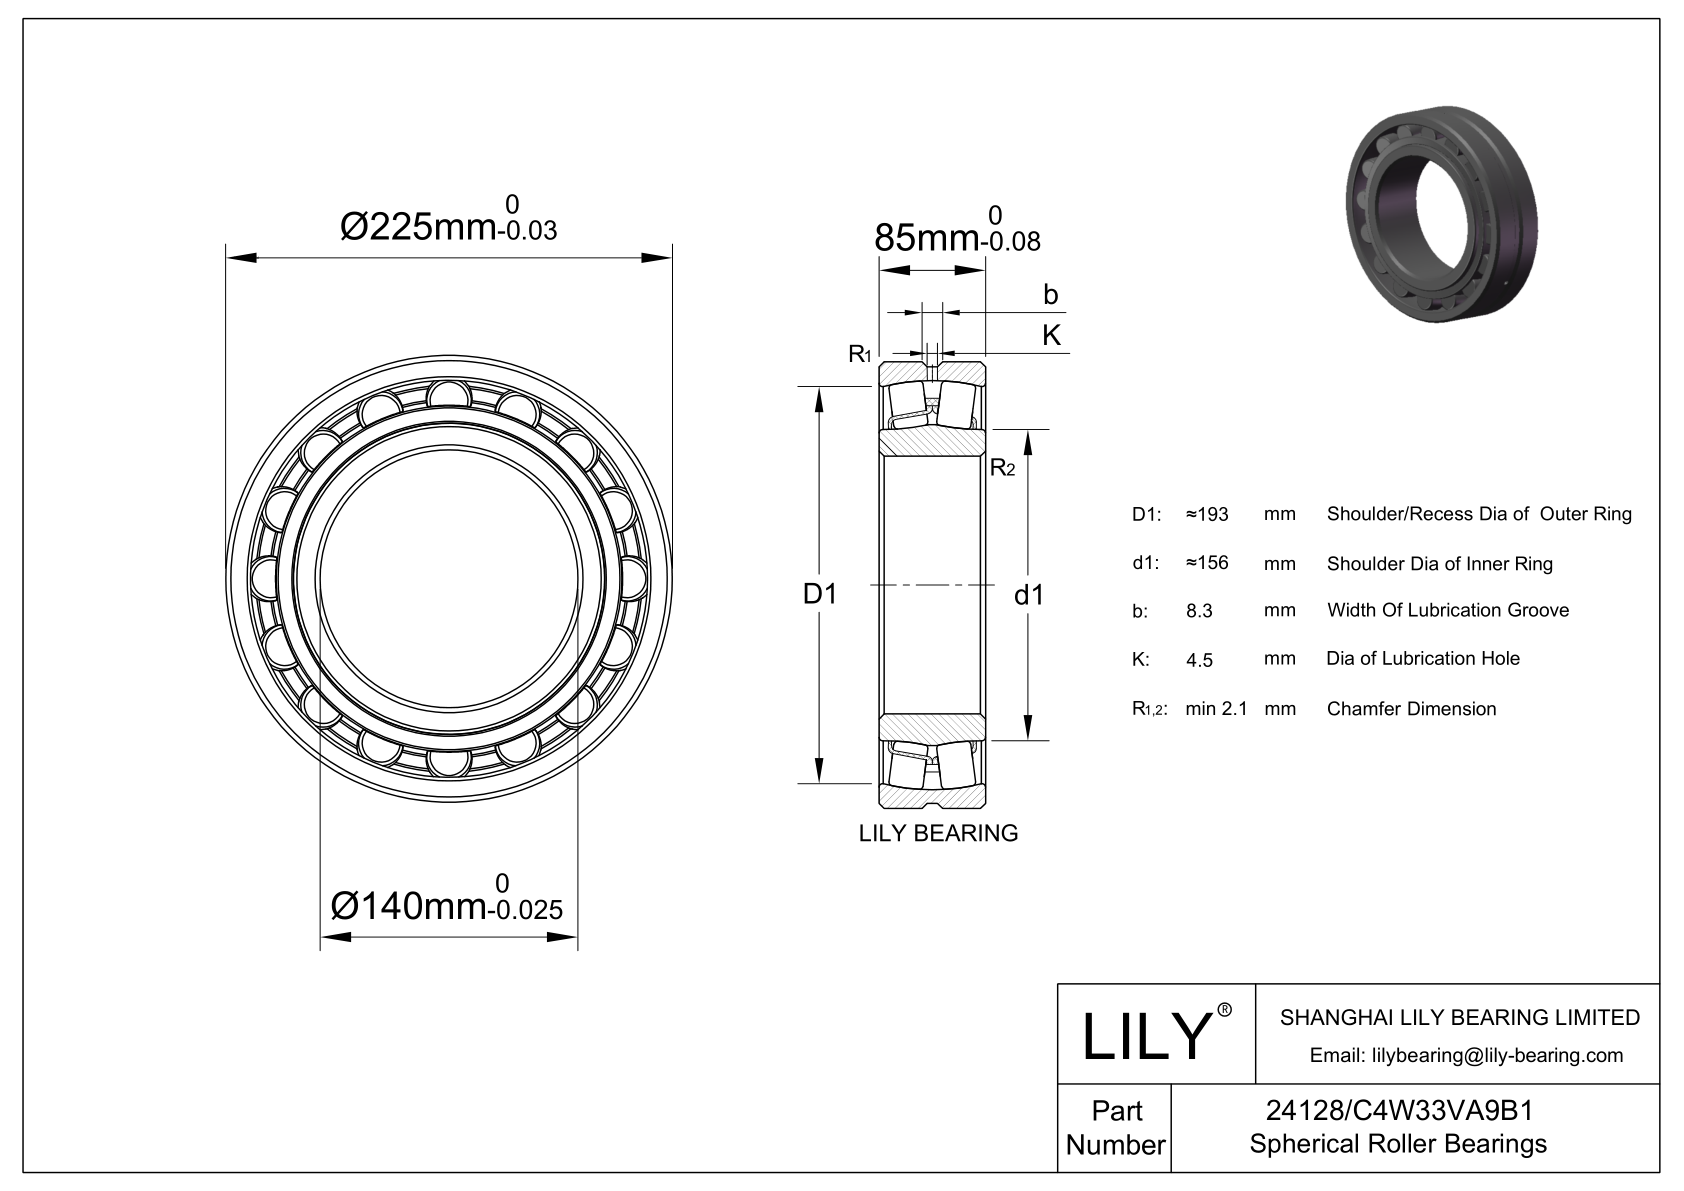 24128/C4W33VA9B1 Double Row Spherical Roller Bearing cad drawing